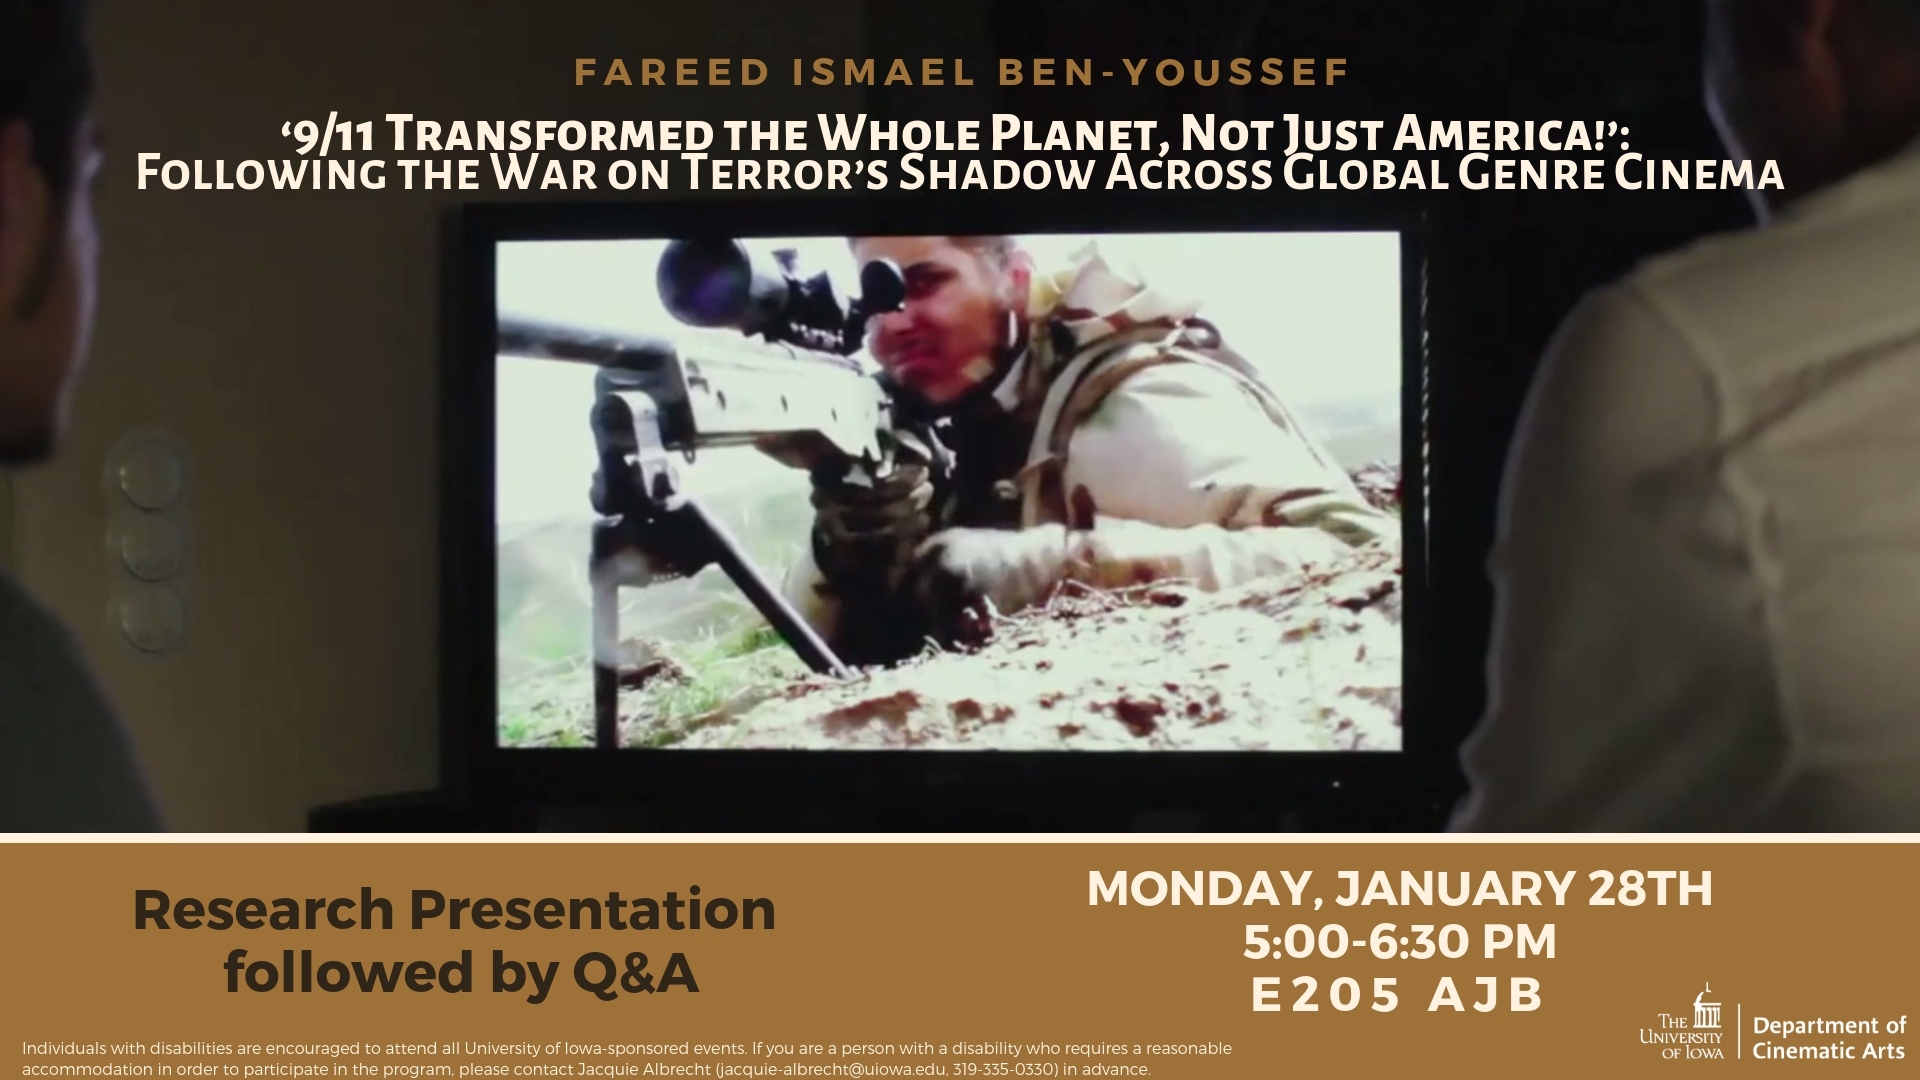 FAREED ISMAEL BEN-YOUSSEF - ‘9/11 Transformed the Whole Planet, Not Just America!’:   Following the War on Terror’s Shadow Across Global Genre Cinema - Research Presentation followed by Q&A - MONDAY, JANUARY 28TH  5:00-6:30 PM  E205 AJB